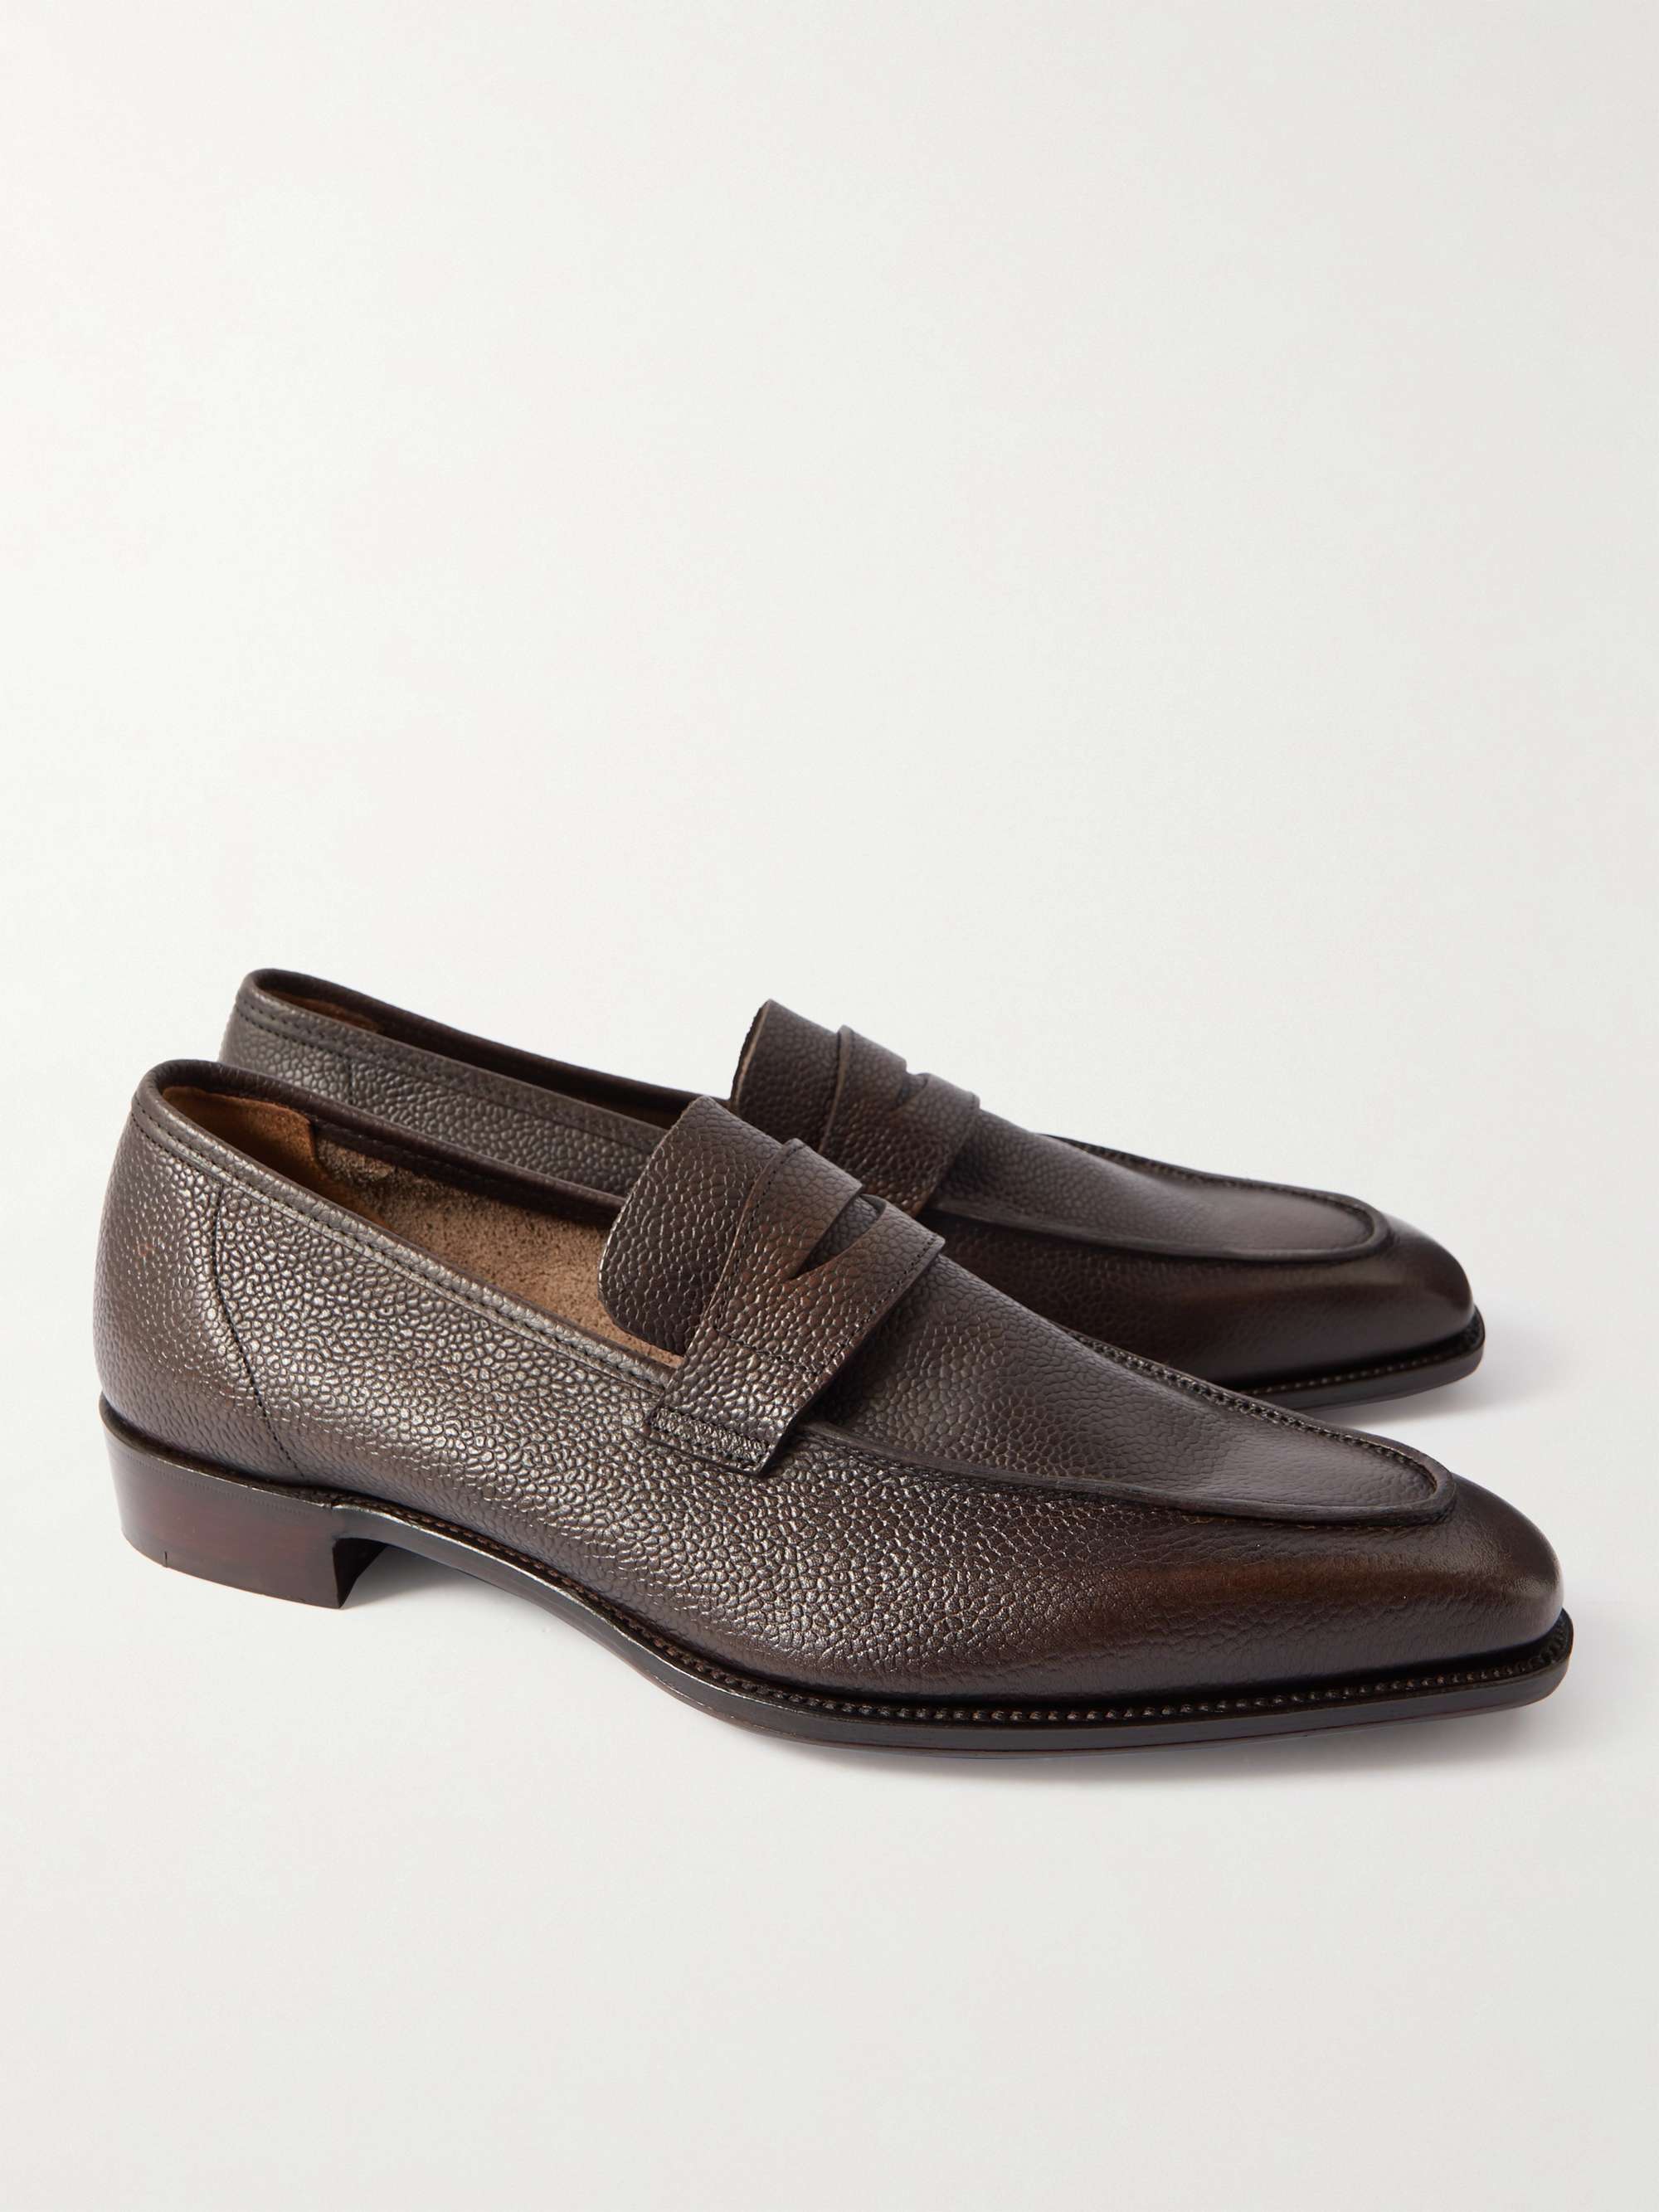 GEORGE CLEVERLEY George Full-Grain Leather Penny Loafers